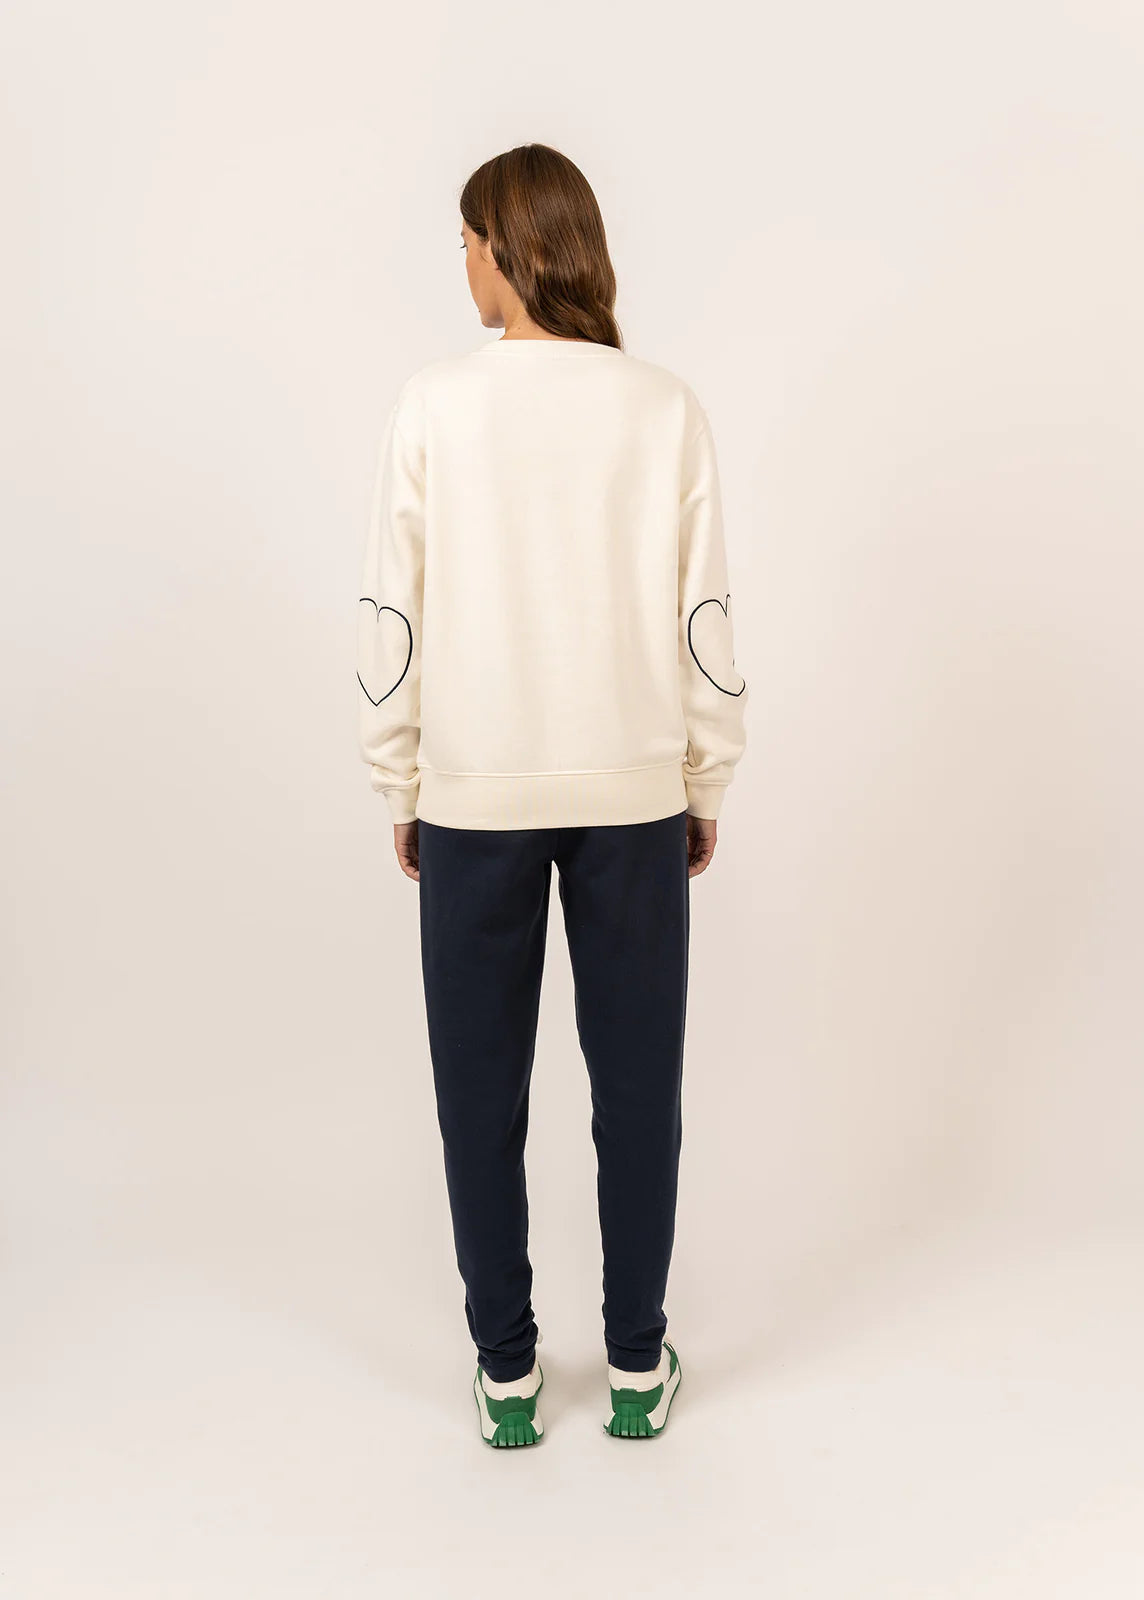 Lola Sweatshirt with Heart Embroidery in White